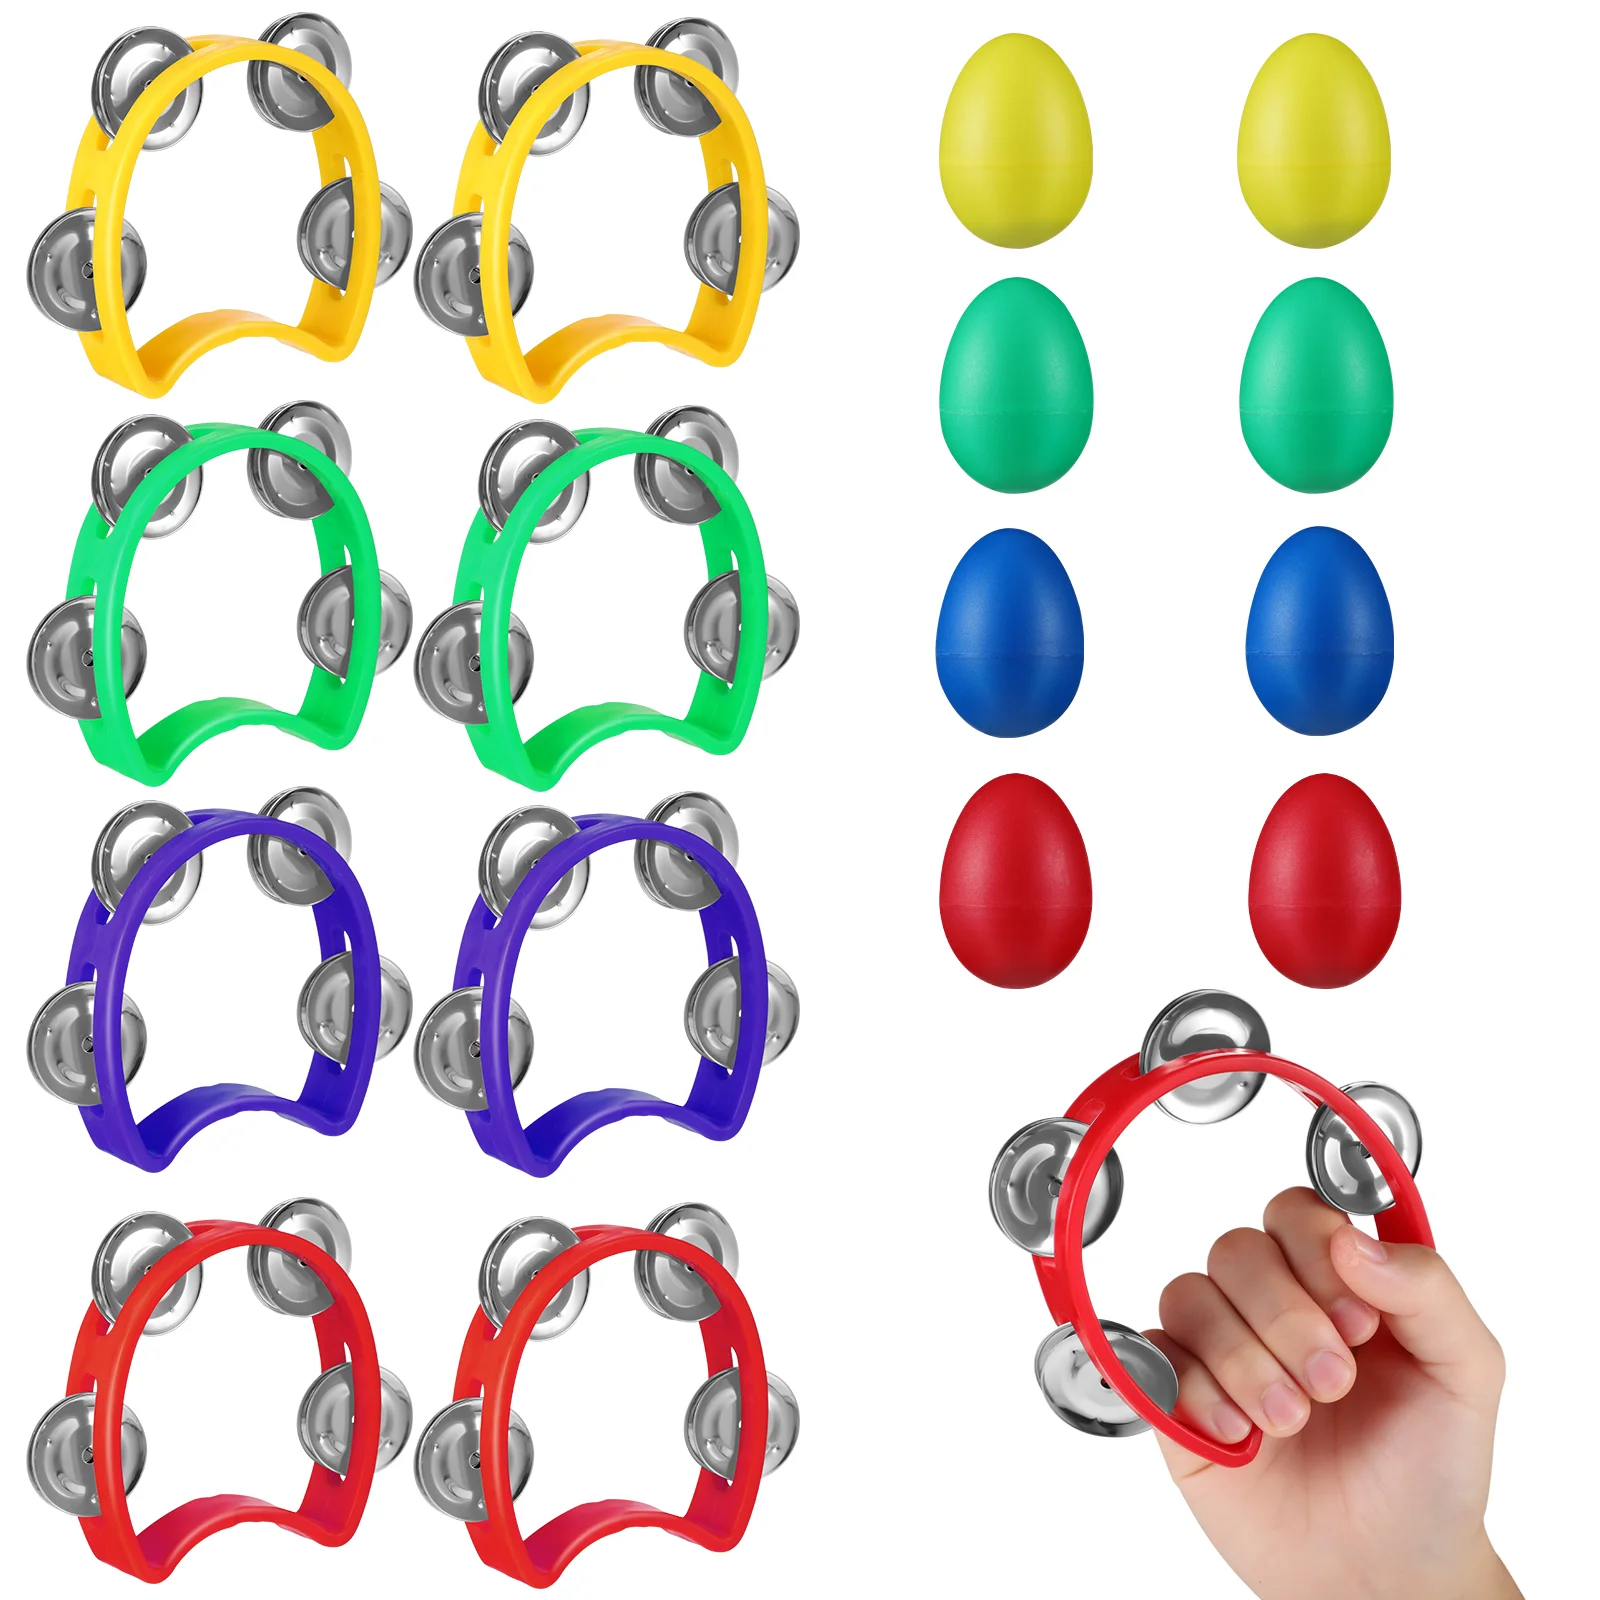 

Four Bell Circle Percussion Tambourines Bulk Music Toys Hand Adults Party Kids Plastic Eggs Handheld